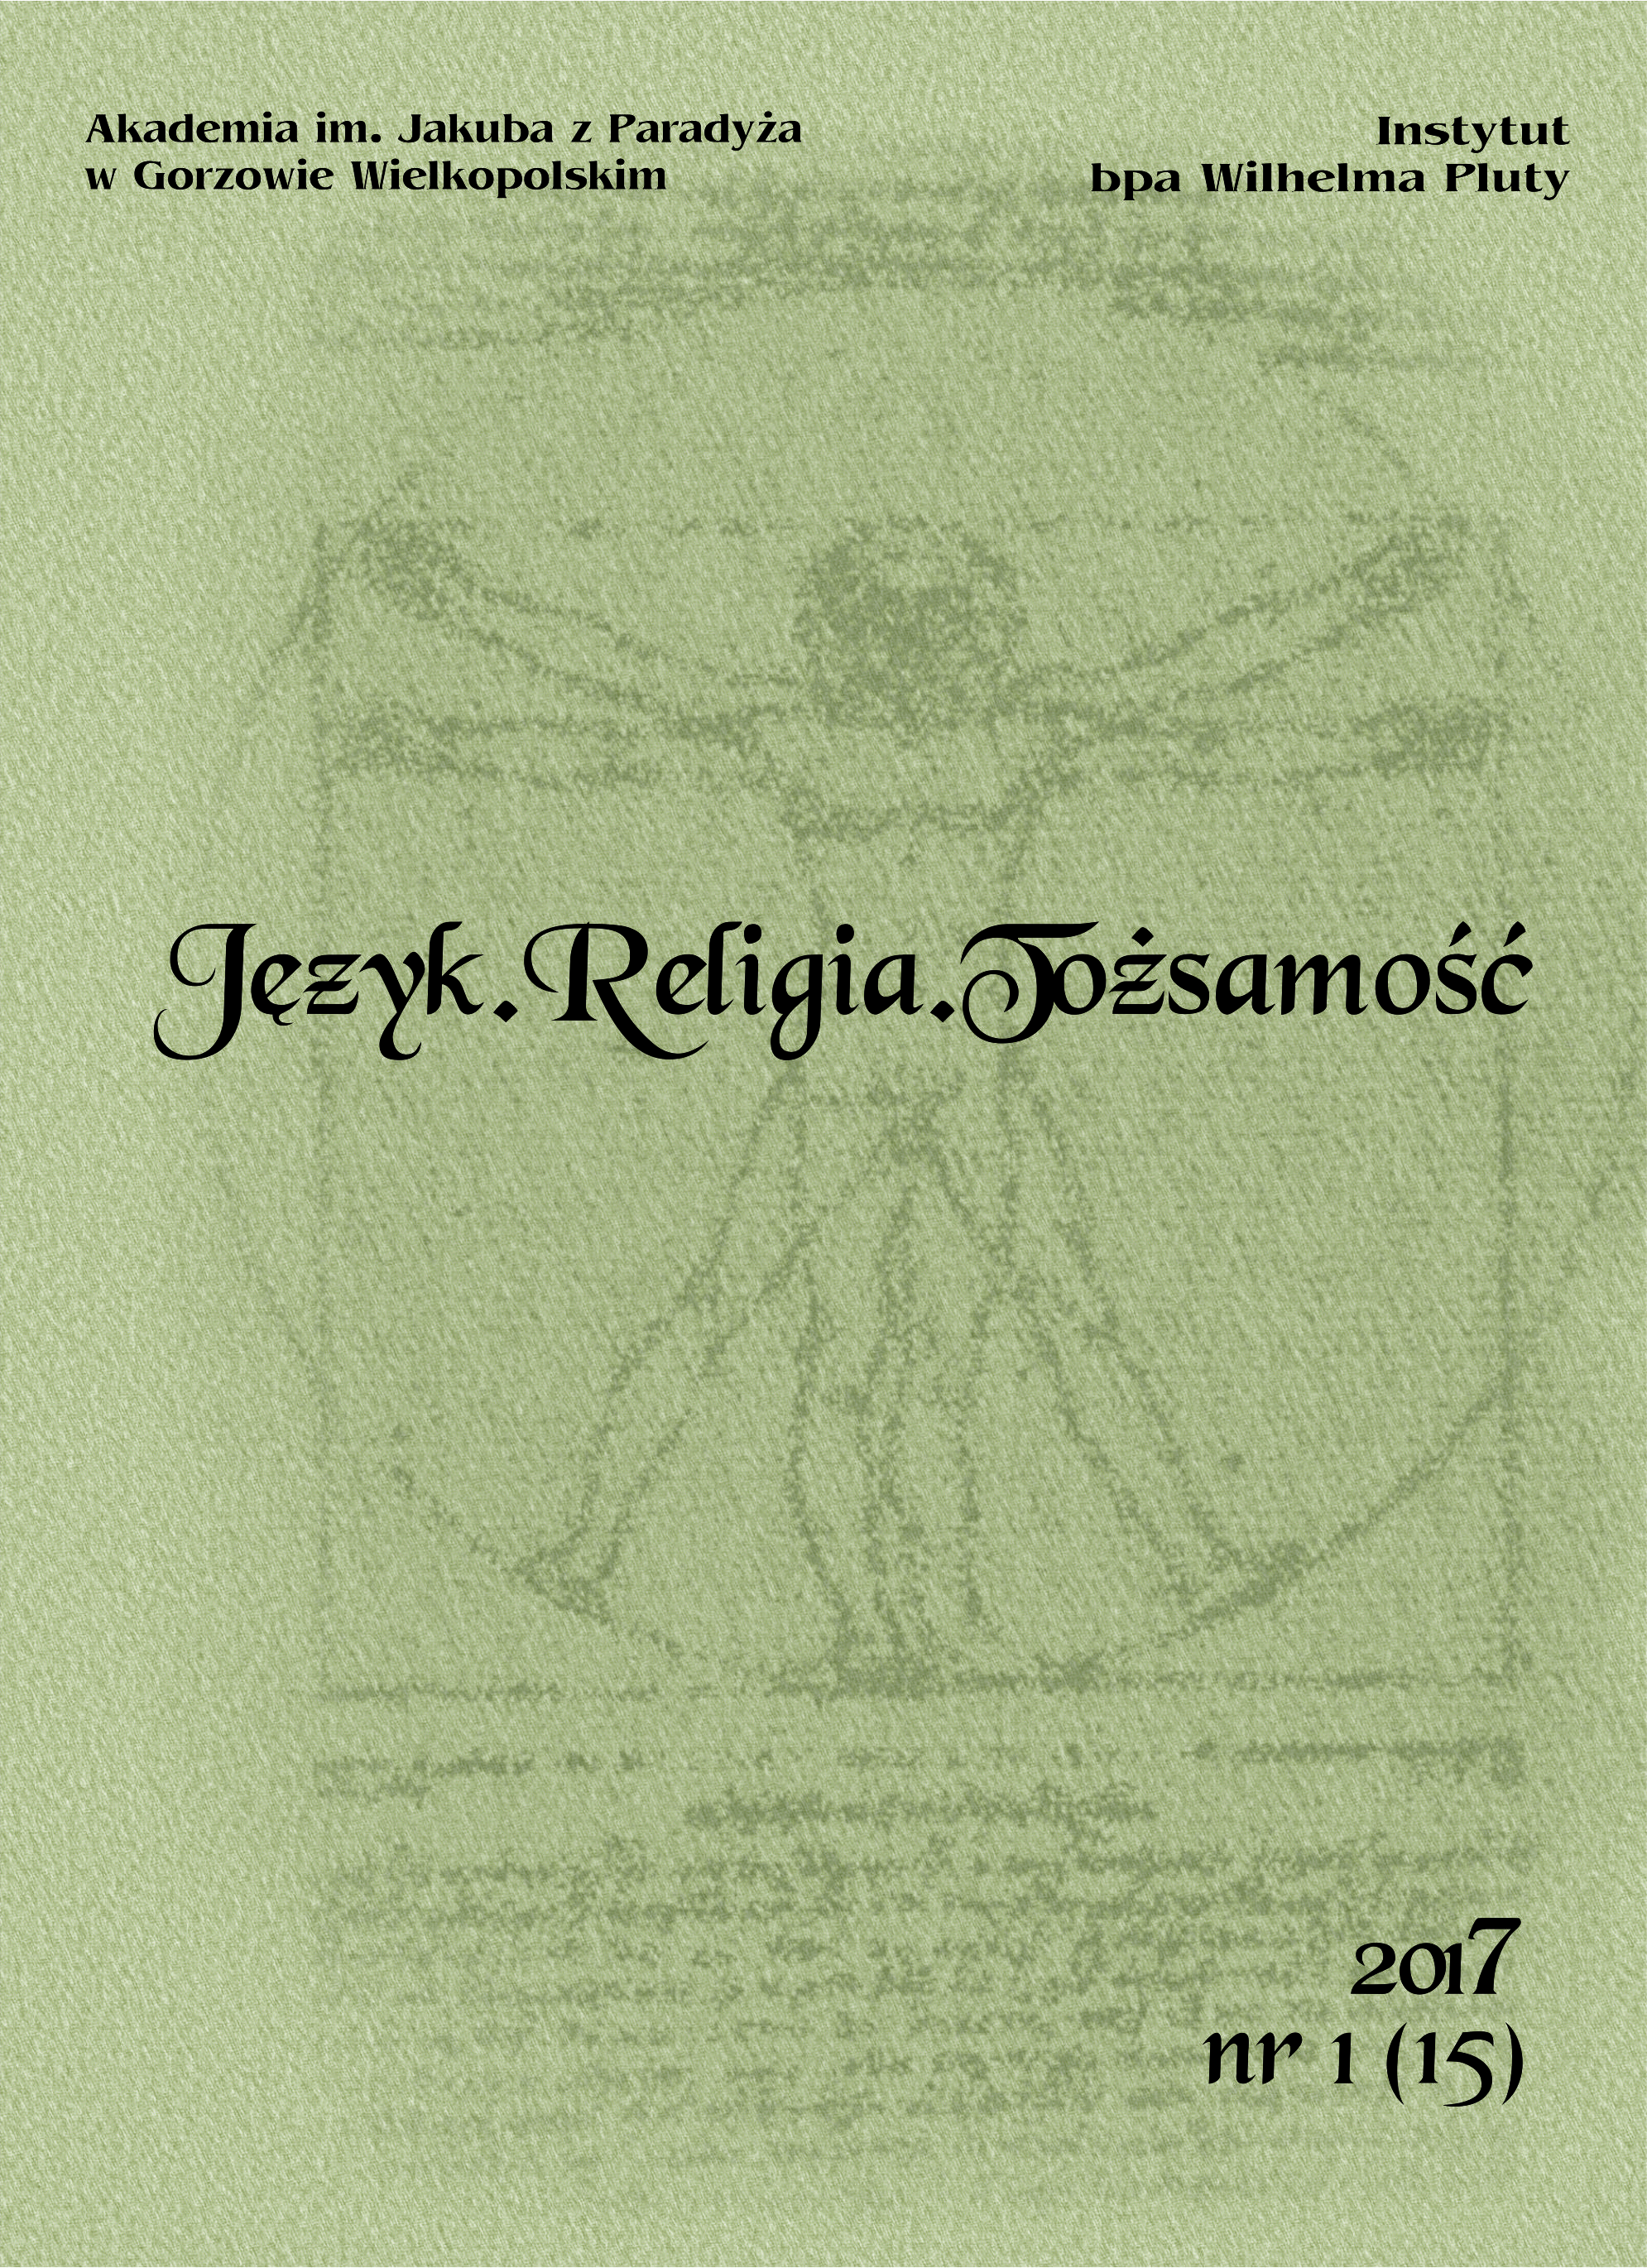 Conferential Identity, that is the History of Głogów Conferences Cover Image